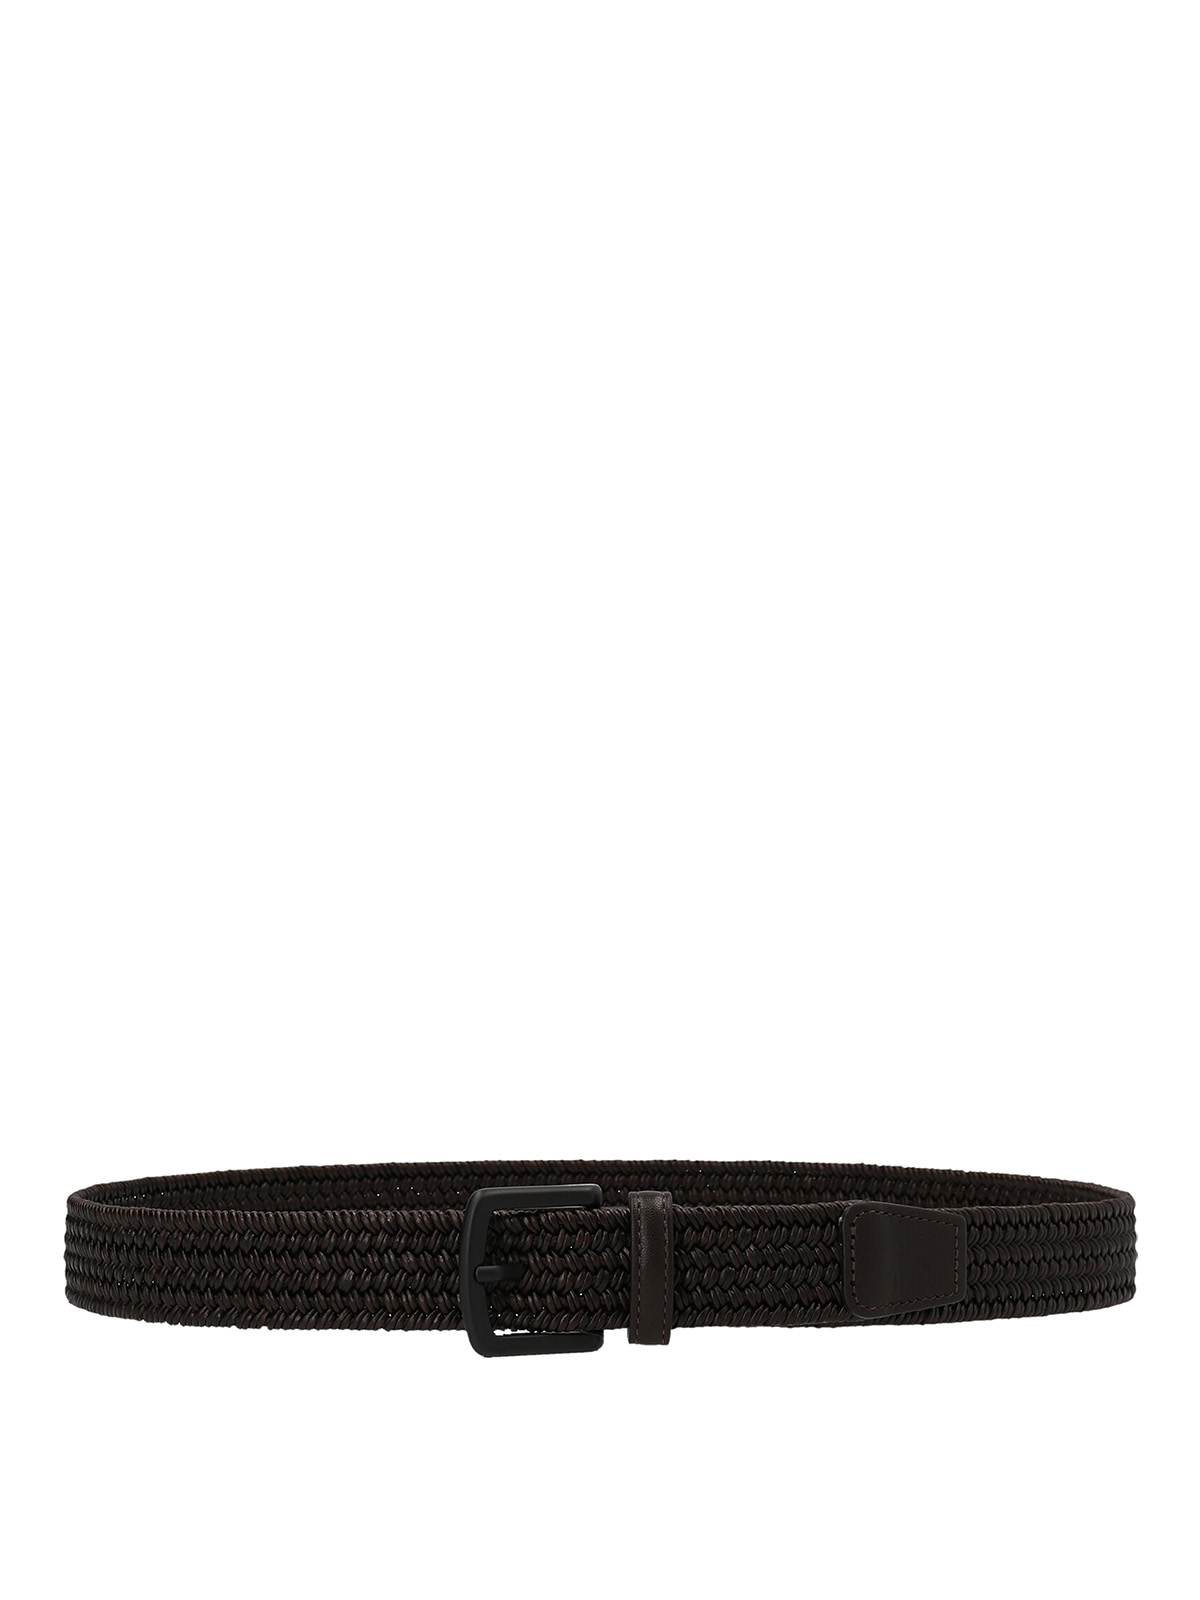 Andrea D'amico Braided Leather Belt In Brown